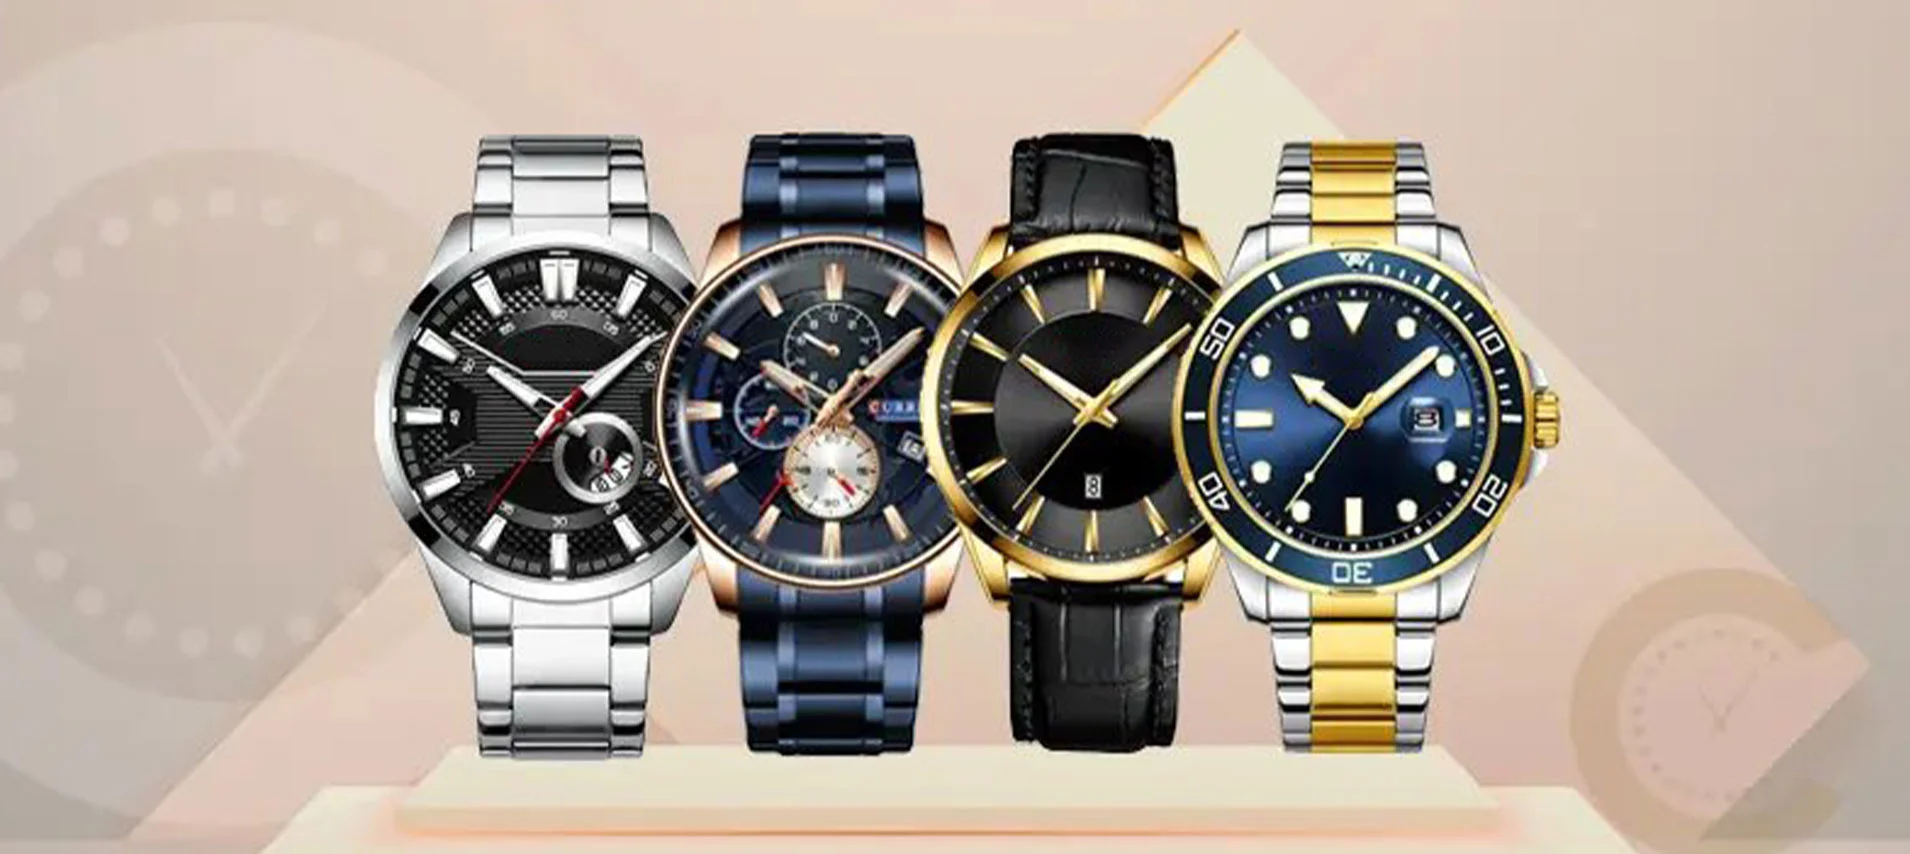 Analog Watches For Men